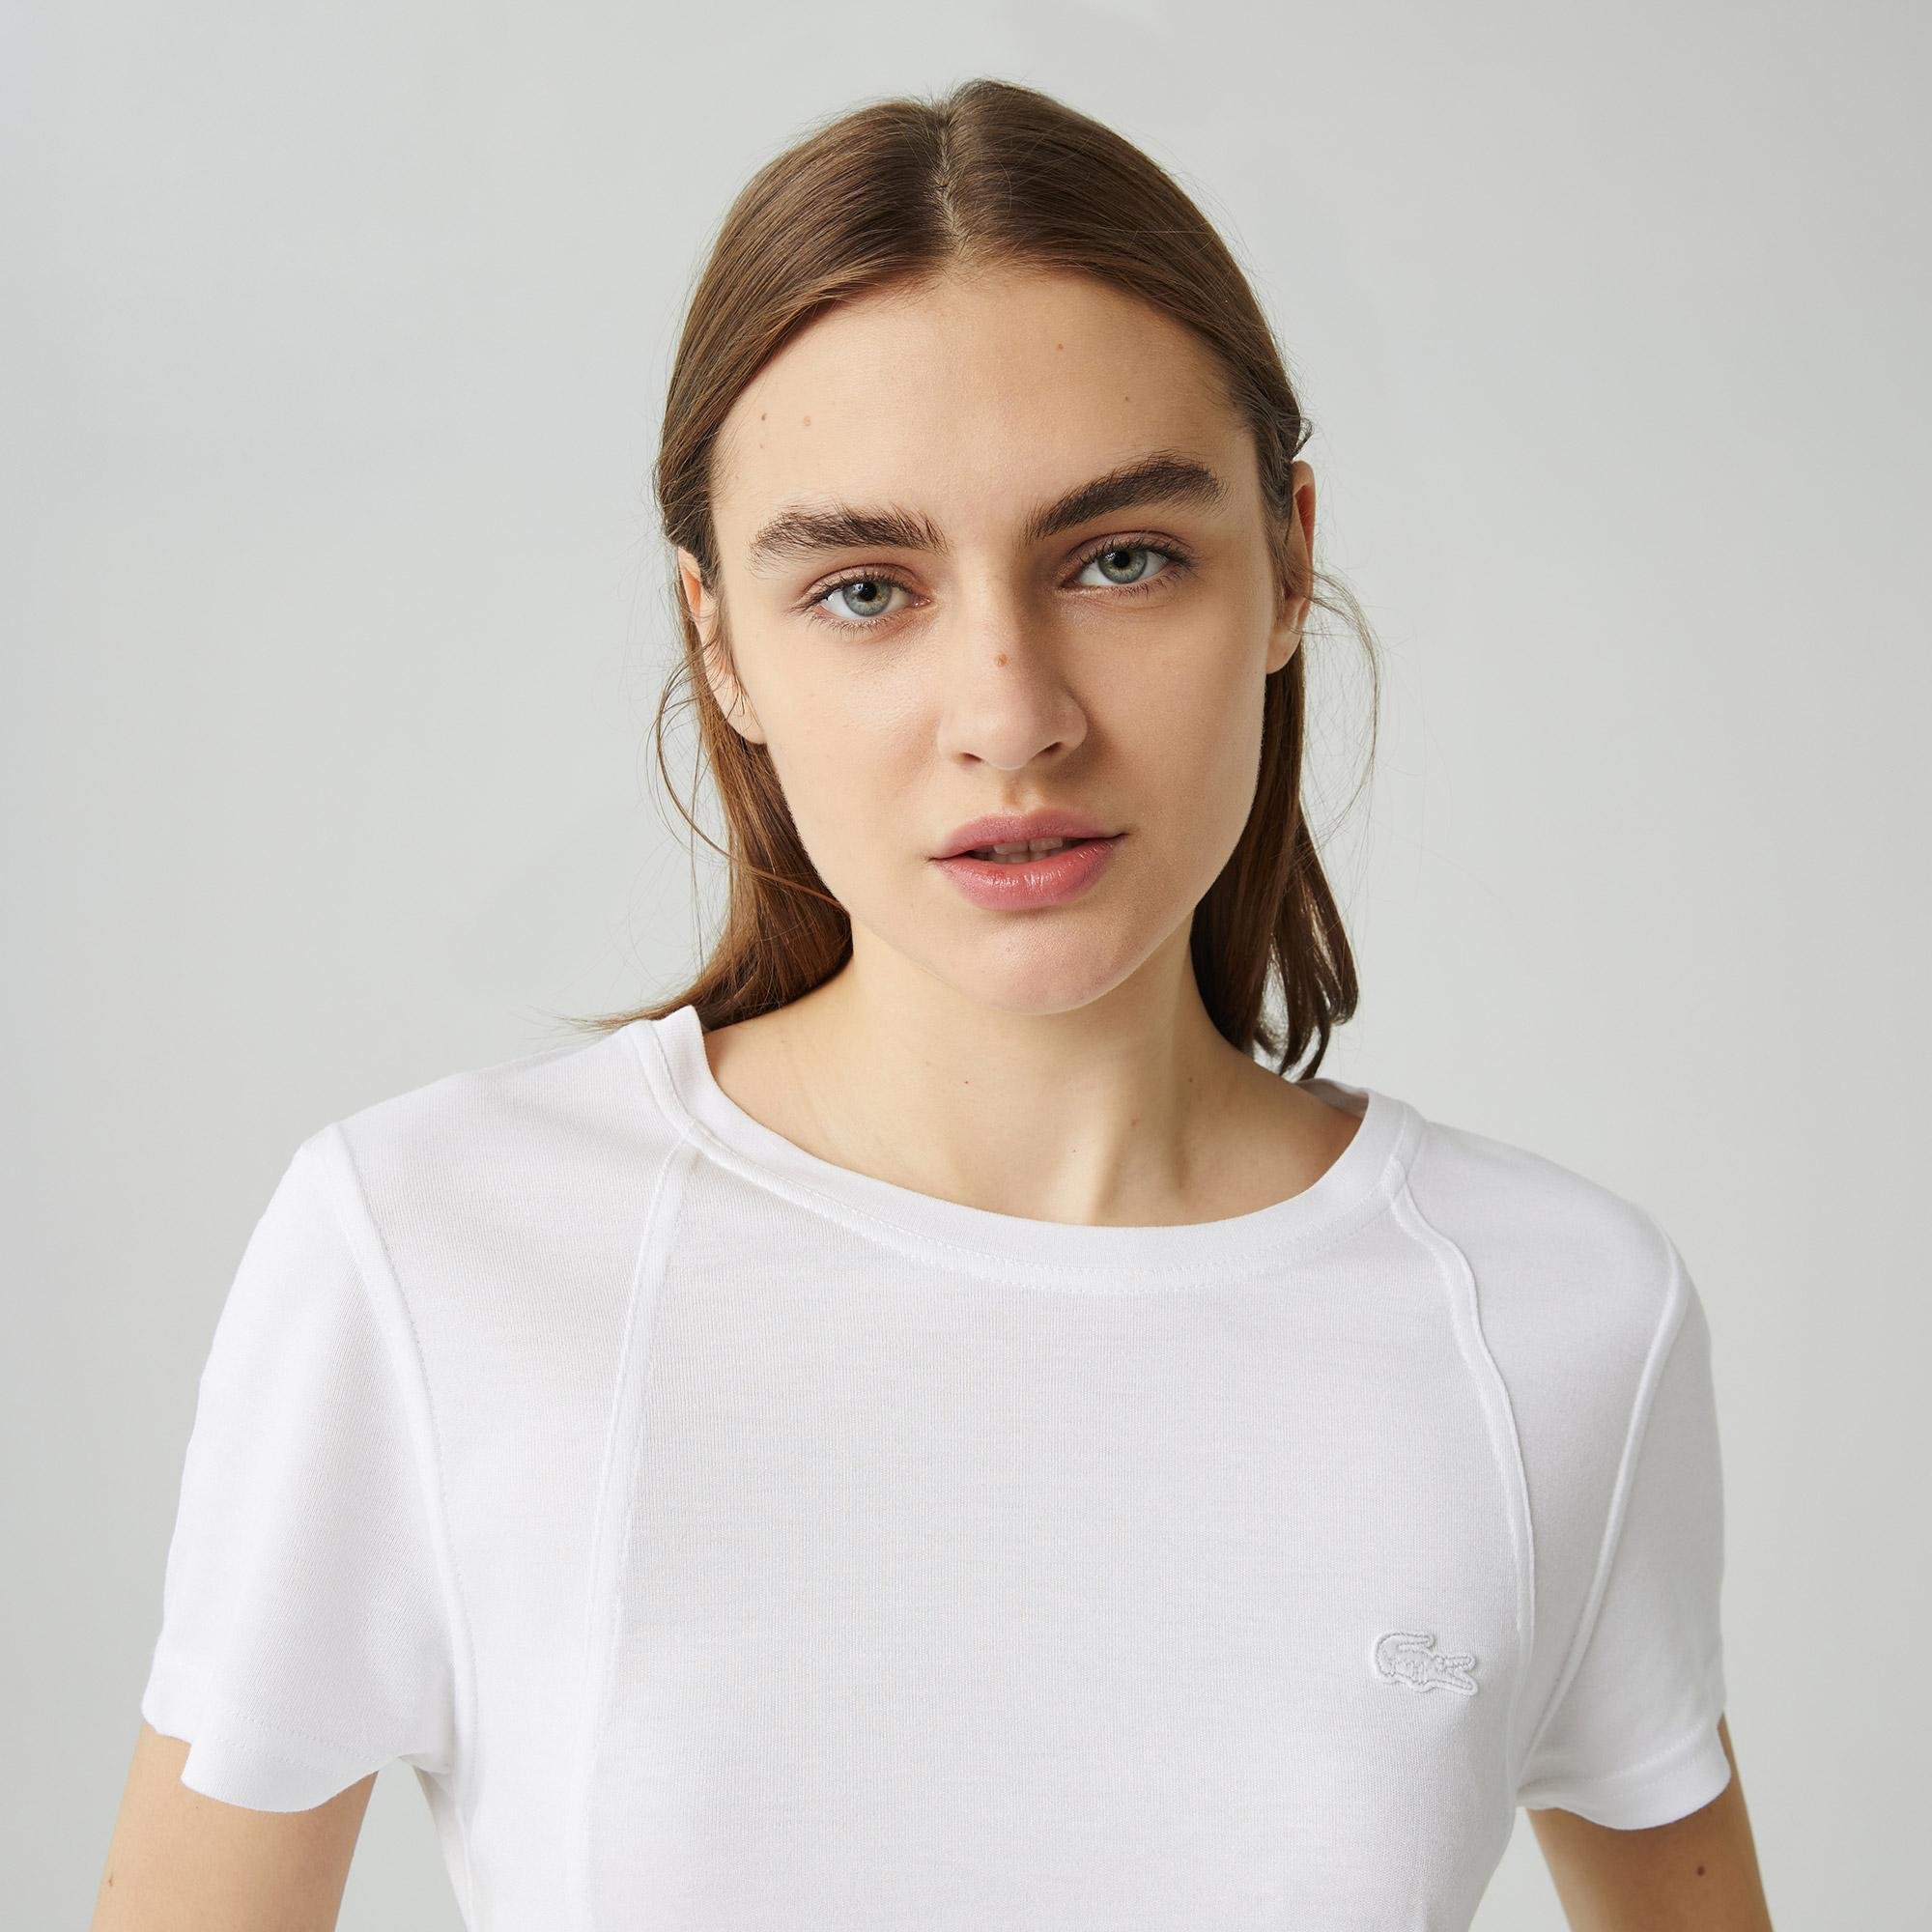 Lacoste Women's Relaxed Fit T-shirt